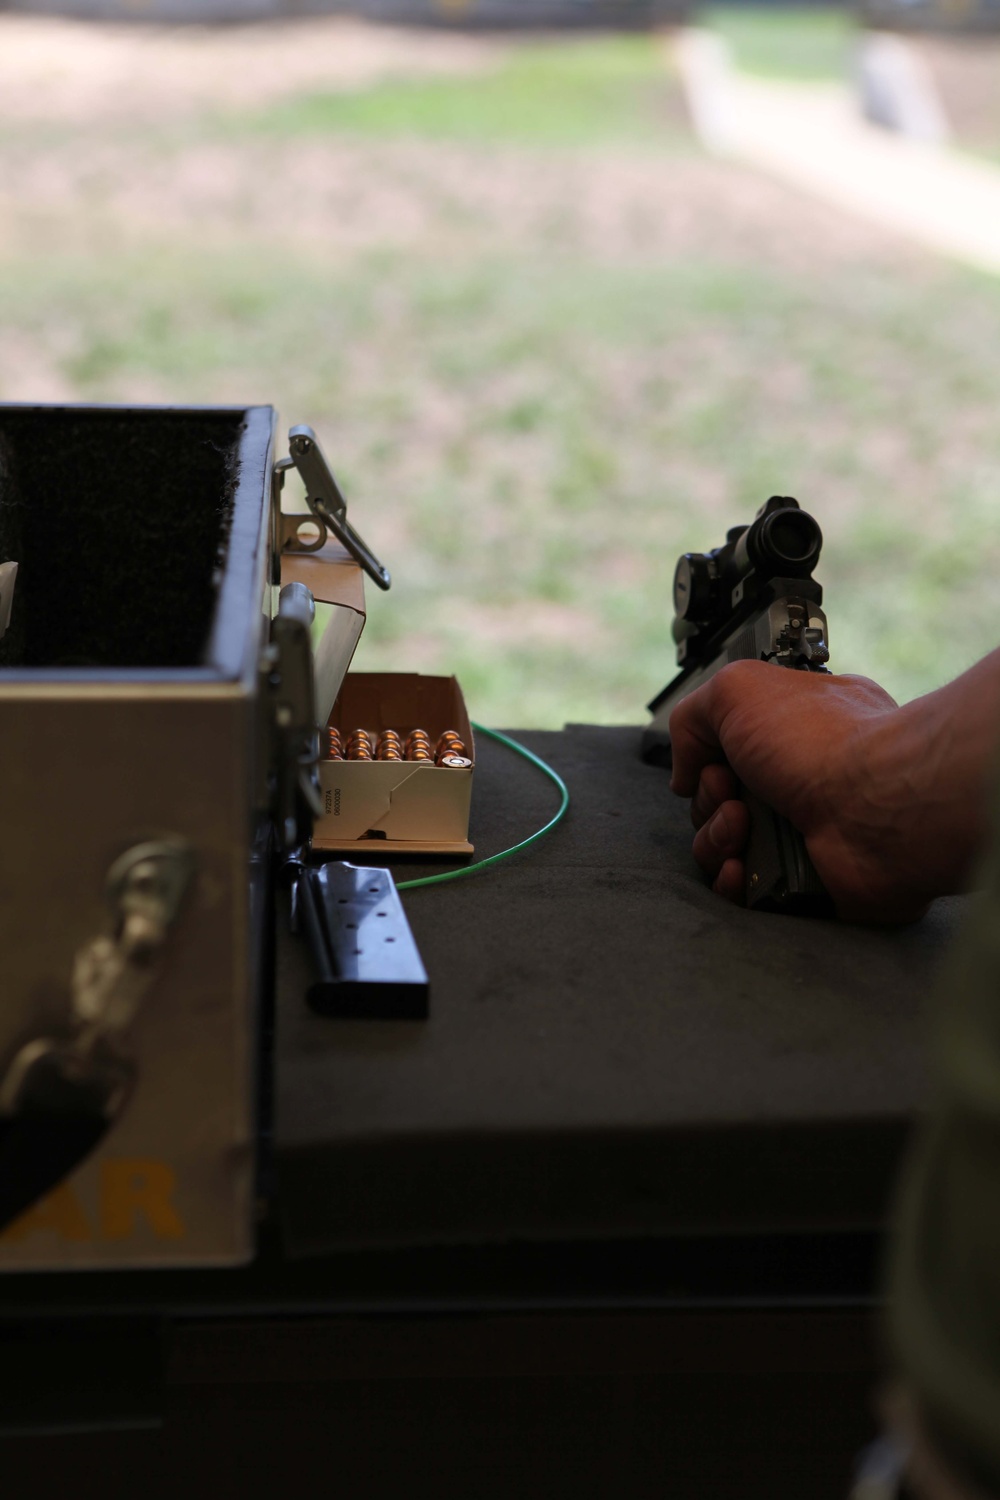 3rd MAW Marines shoot ‘em up at pistol competition